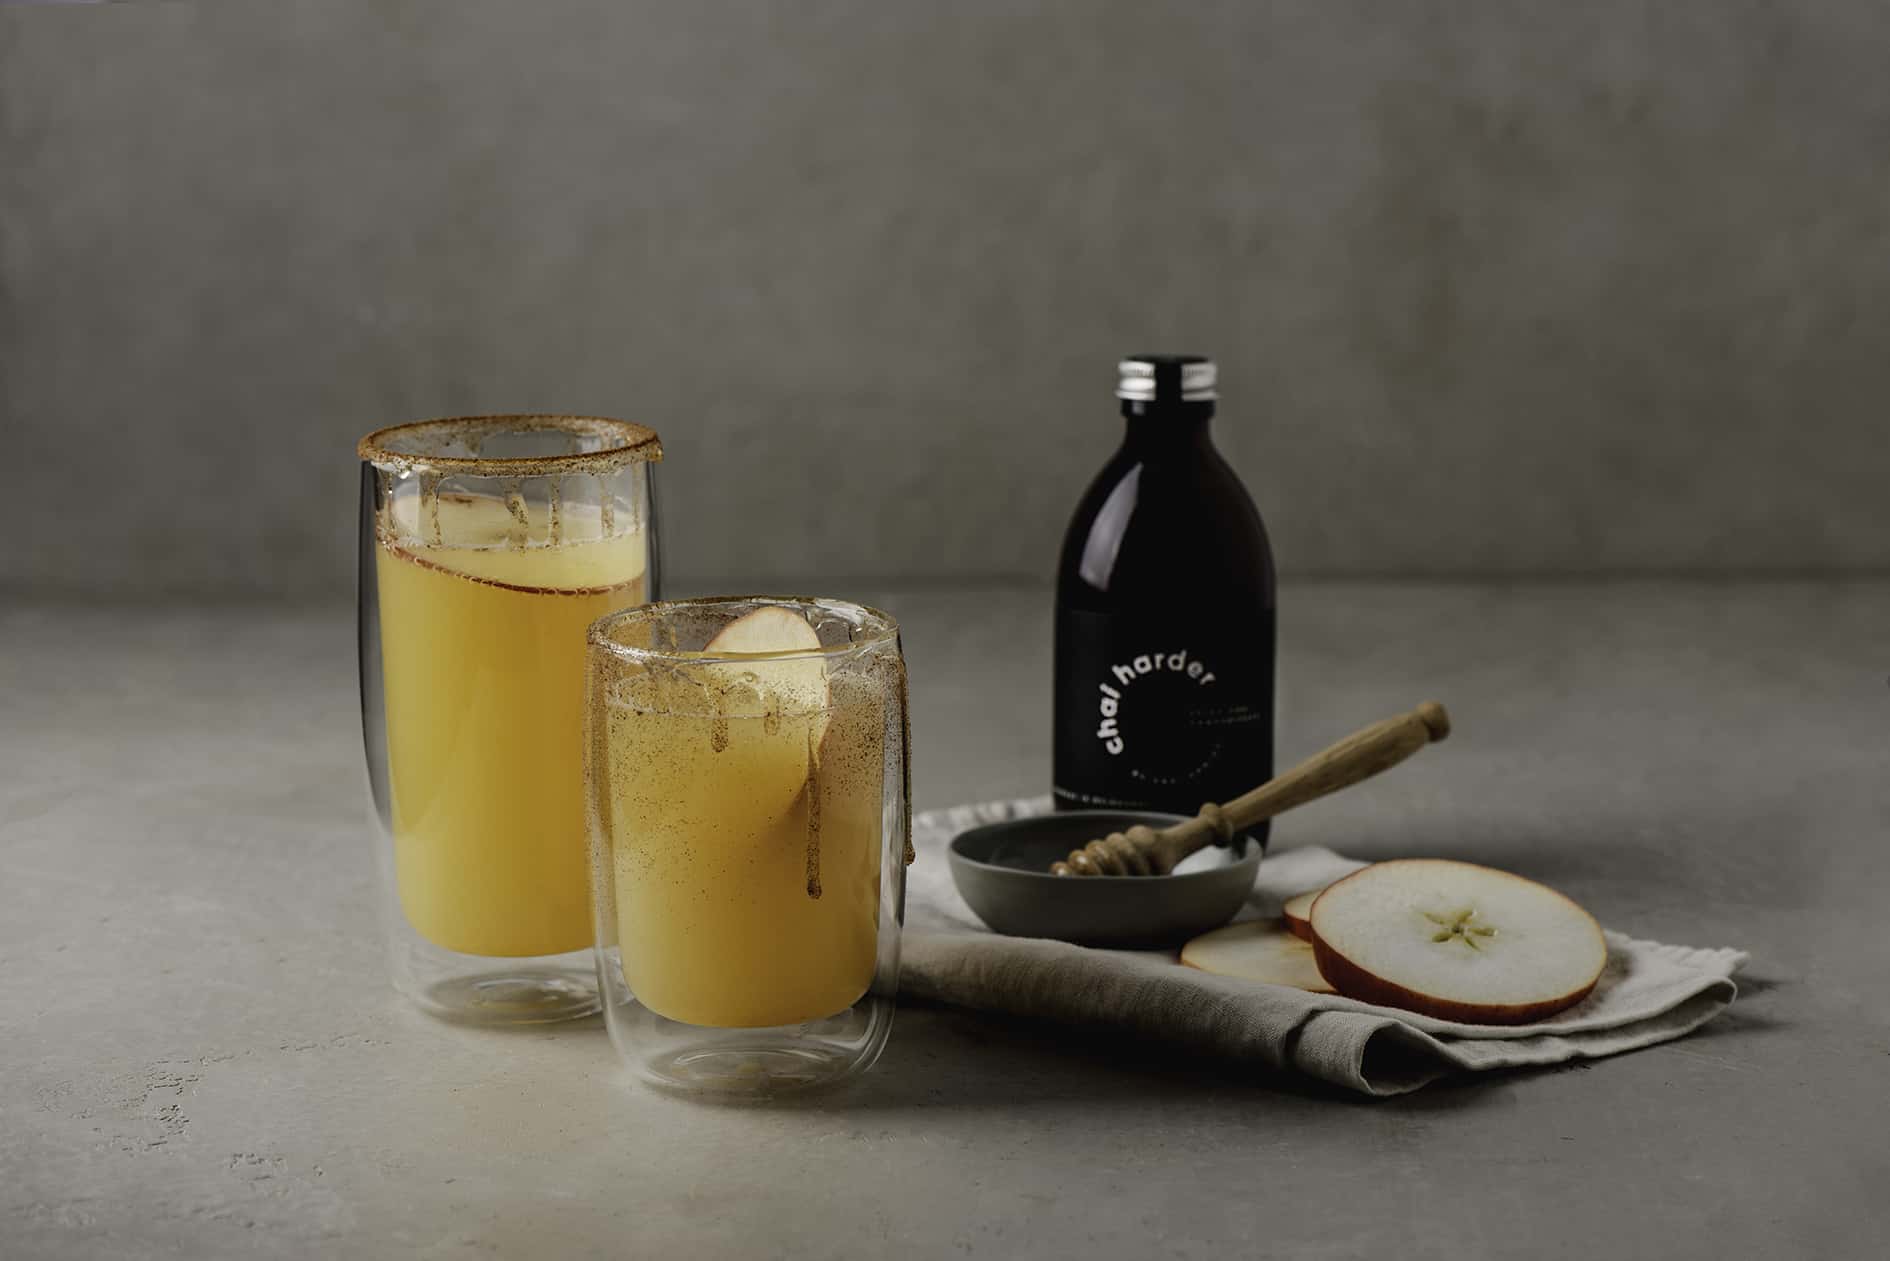 refreshing chai soda served in a glass tumbler dripping with honey, a small saucer with honey wand and round sliced apples on grey tea towel and a bottle of chai harder spicy chai concentrate